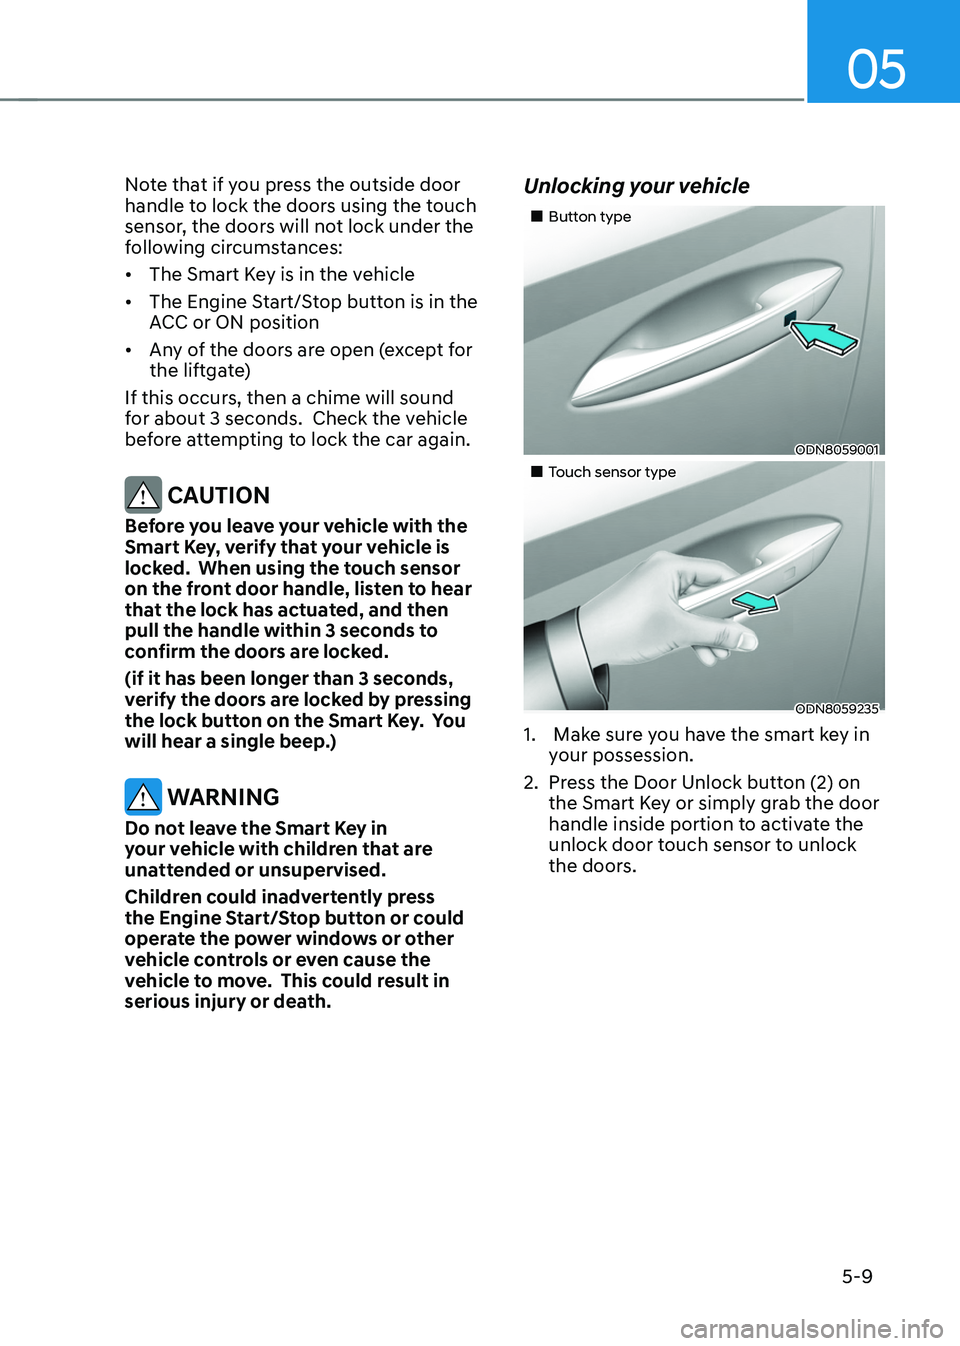 HYUNDAI TUCSON 2022  Owners Manual 05
5-9
Note that if you press the outside door 
handle to lock the doors using the touch 
sensor, the doors will not lock under the 
following circumstances:
•	The Smart Key is in the vehicle
•	 T